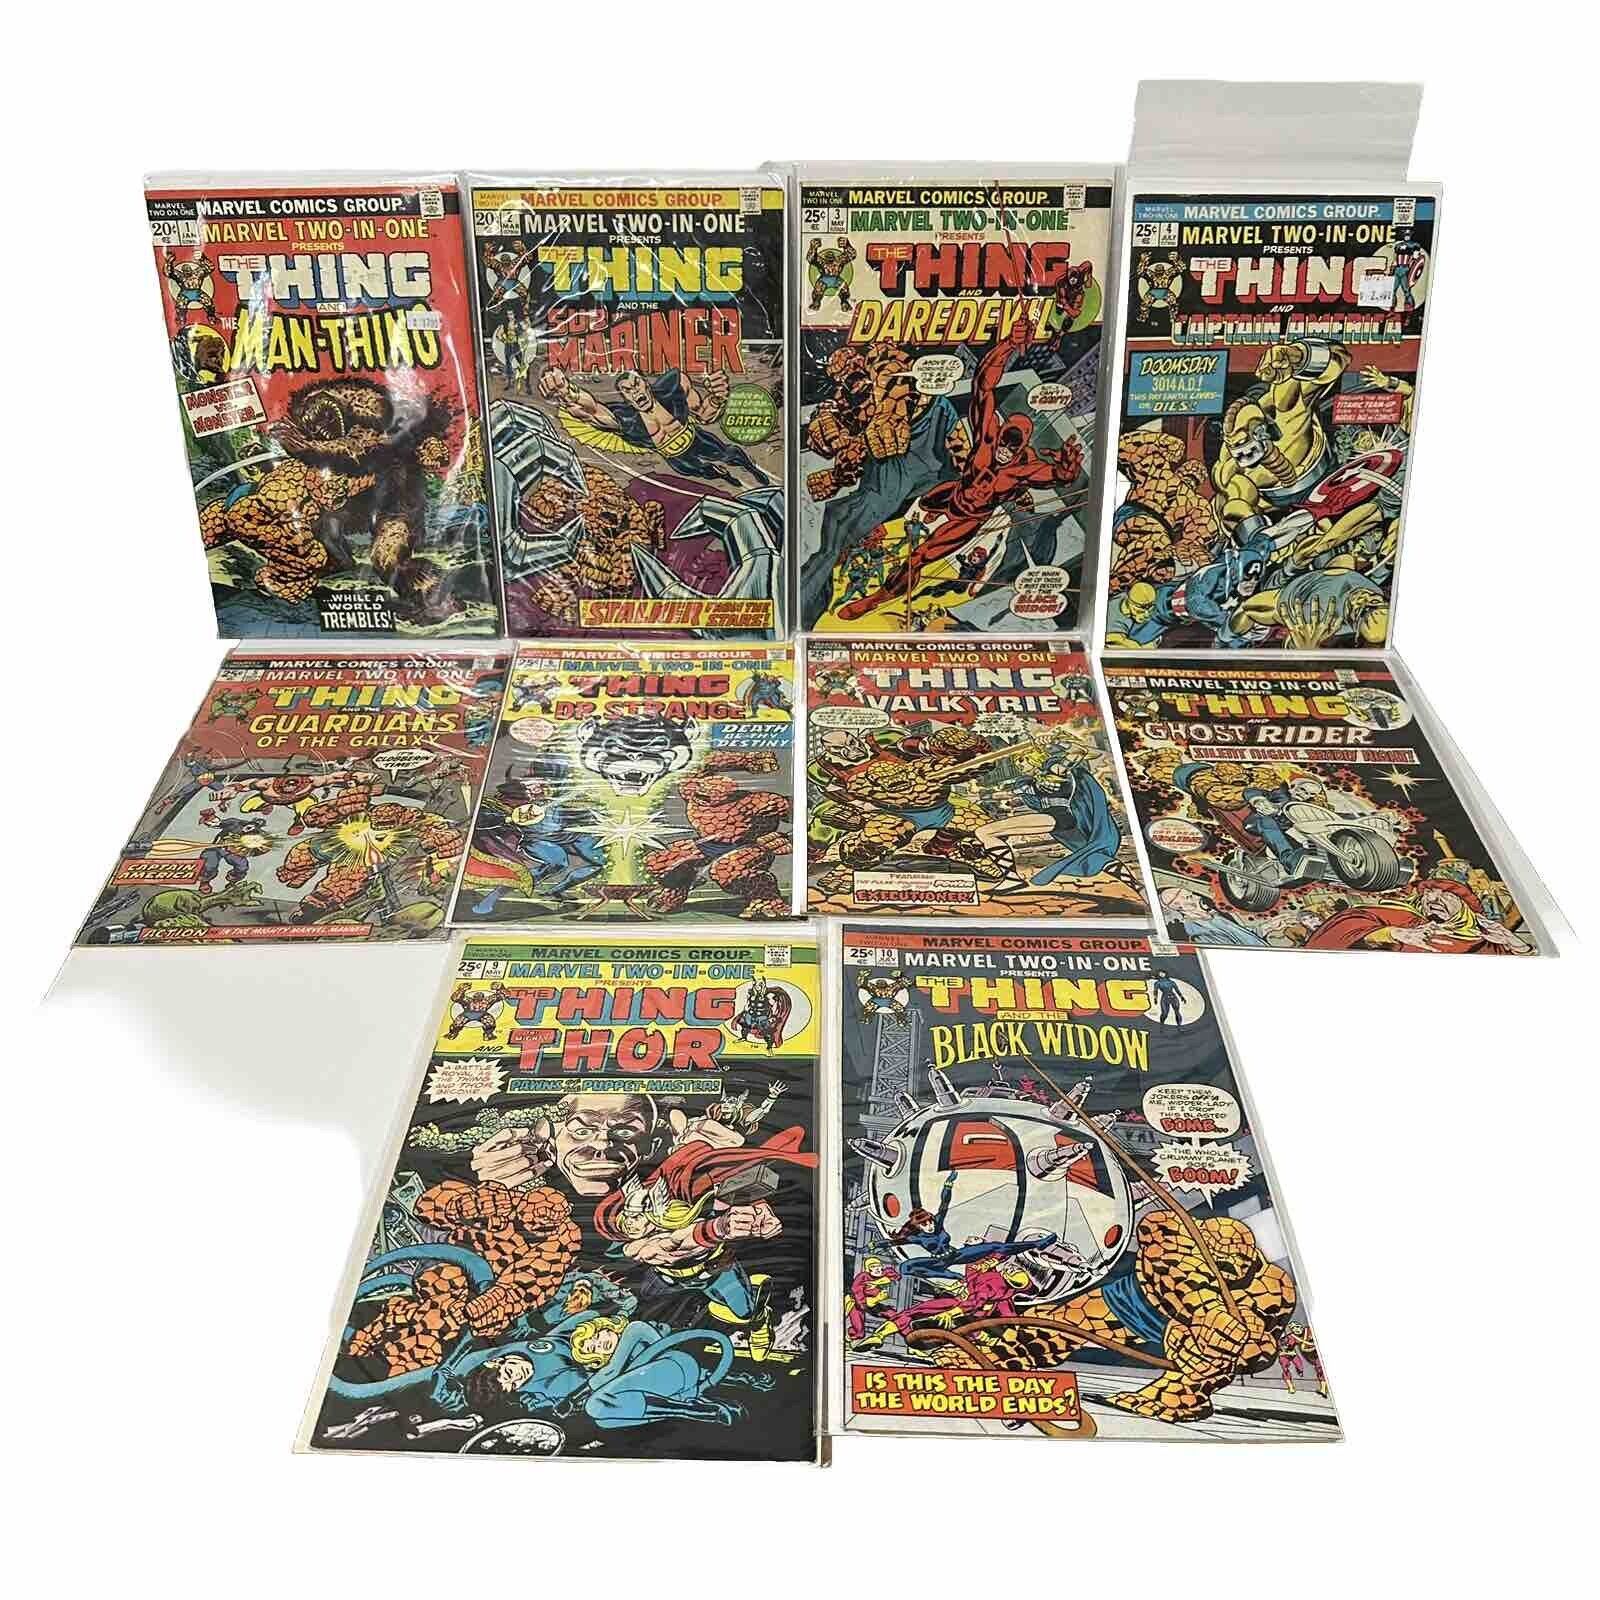 Marvel Two In One 1 Through 10 , Thing / Man-Thing / Sub-Mariner Lot Of 10 Books